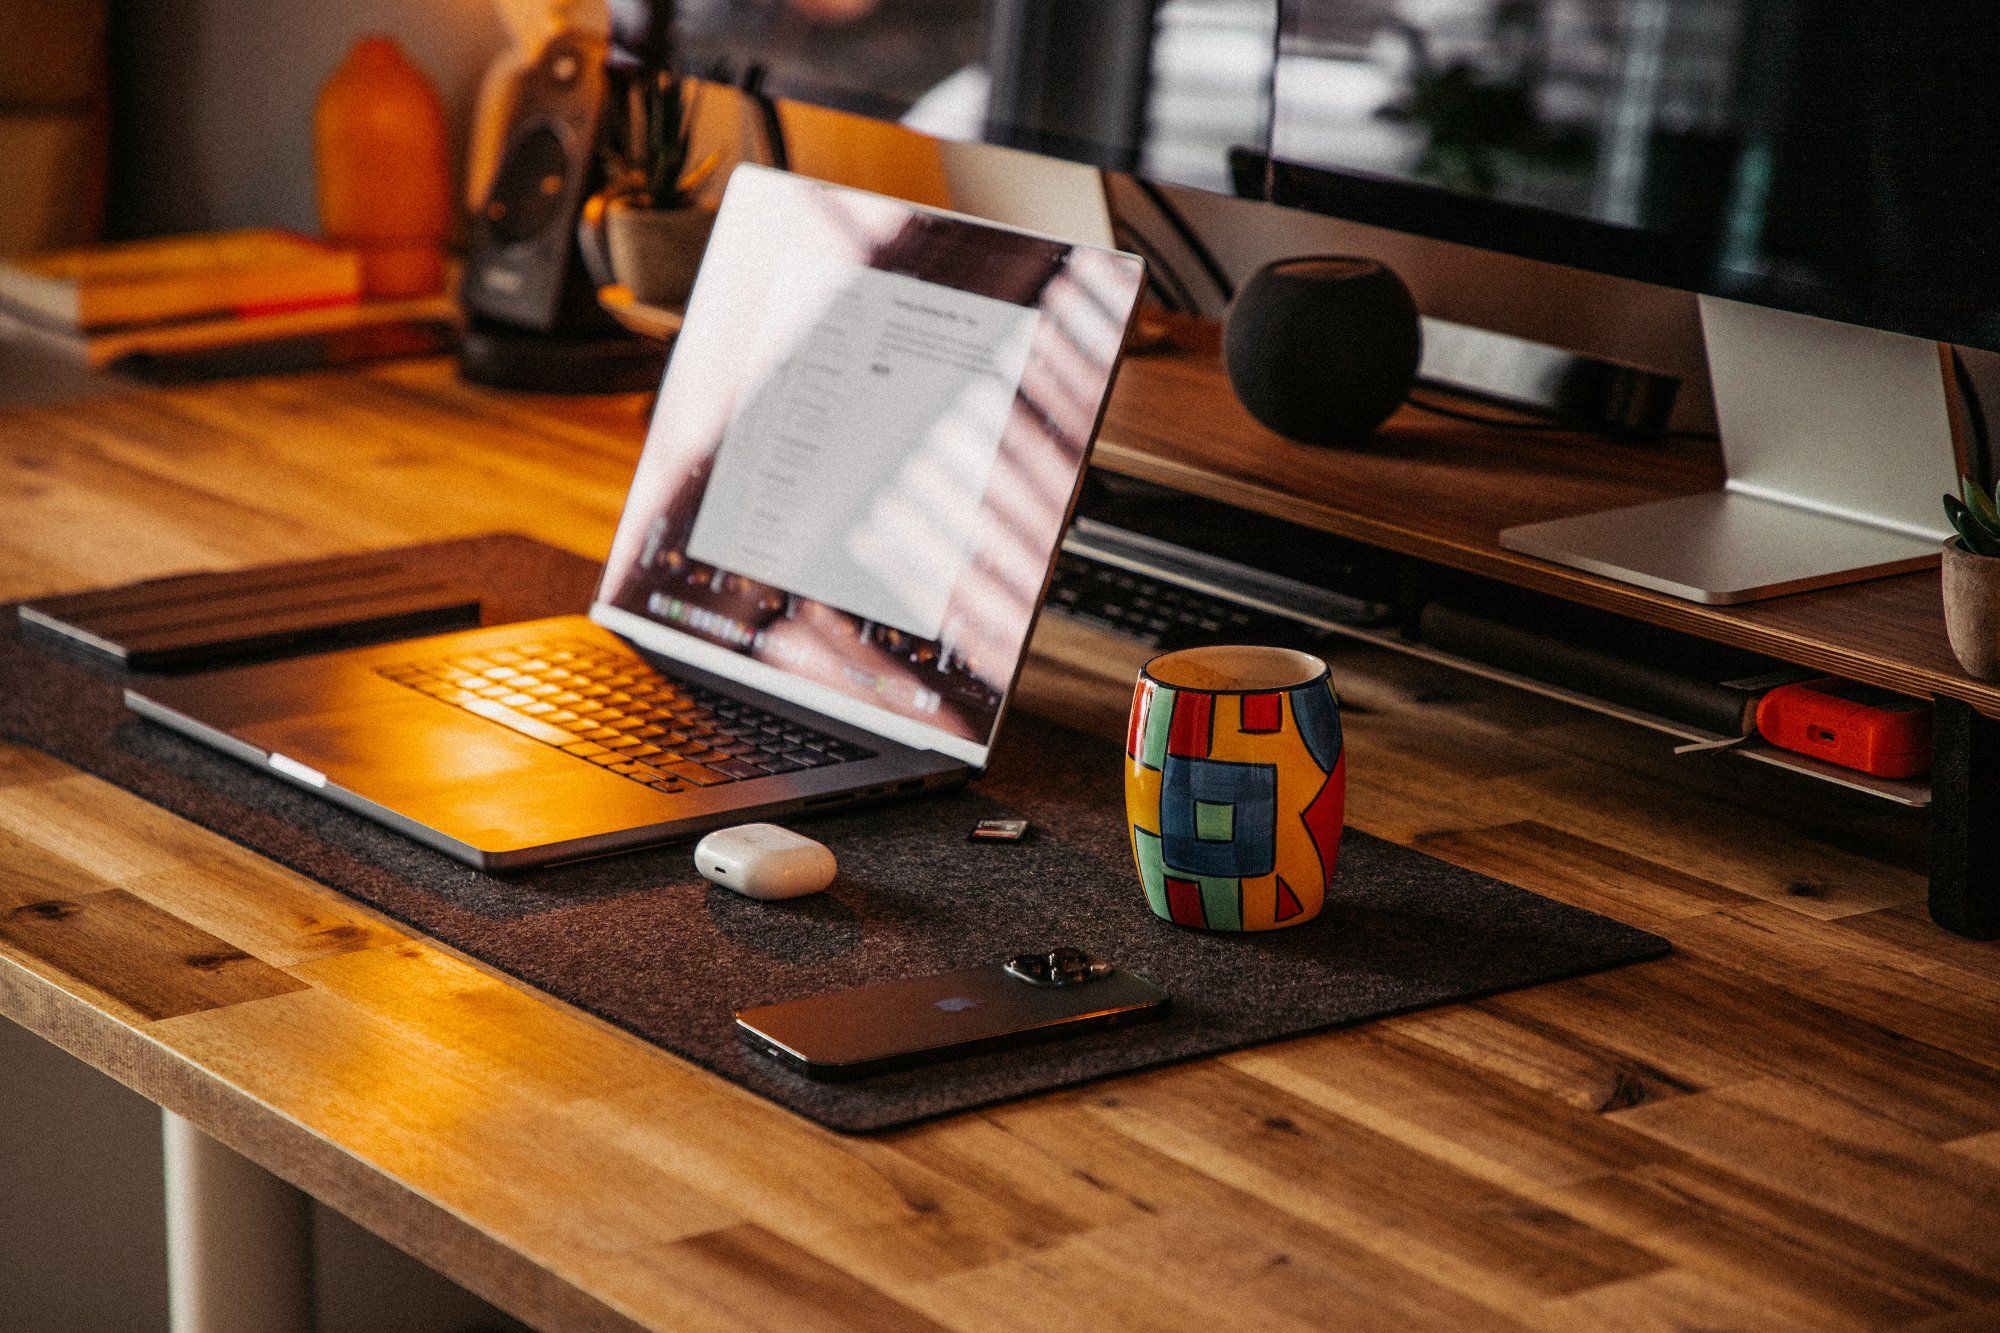 On a desk with a wooden top lies a wool Grovemade desk mat, and on it are placed a MacBook Pro, an iPhone, AirPods, and a mug with a multicoloured pattern